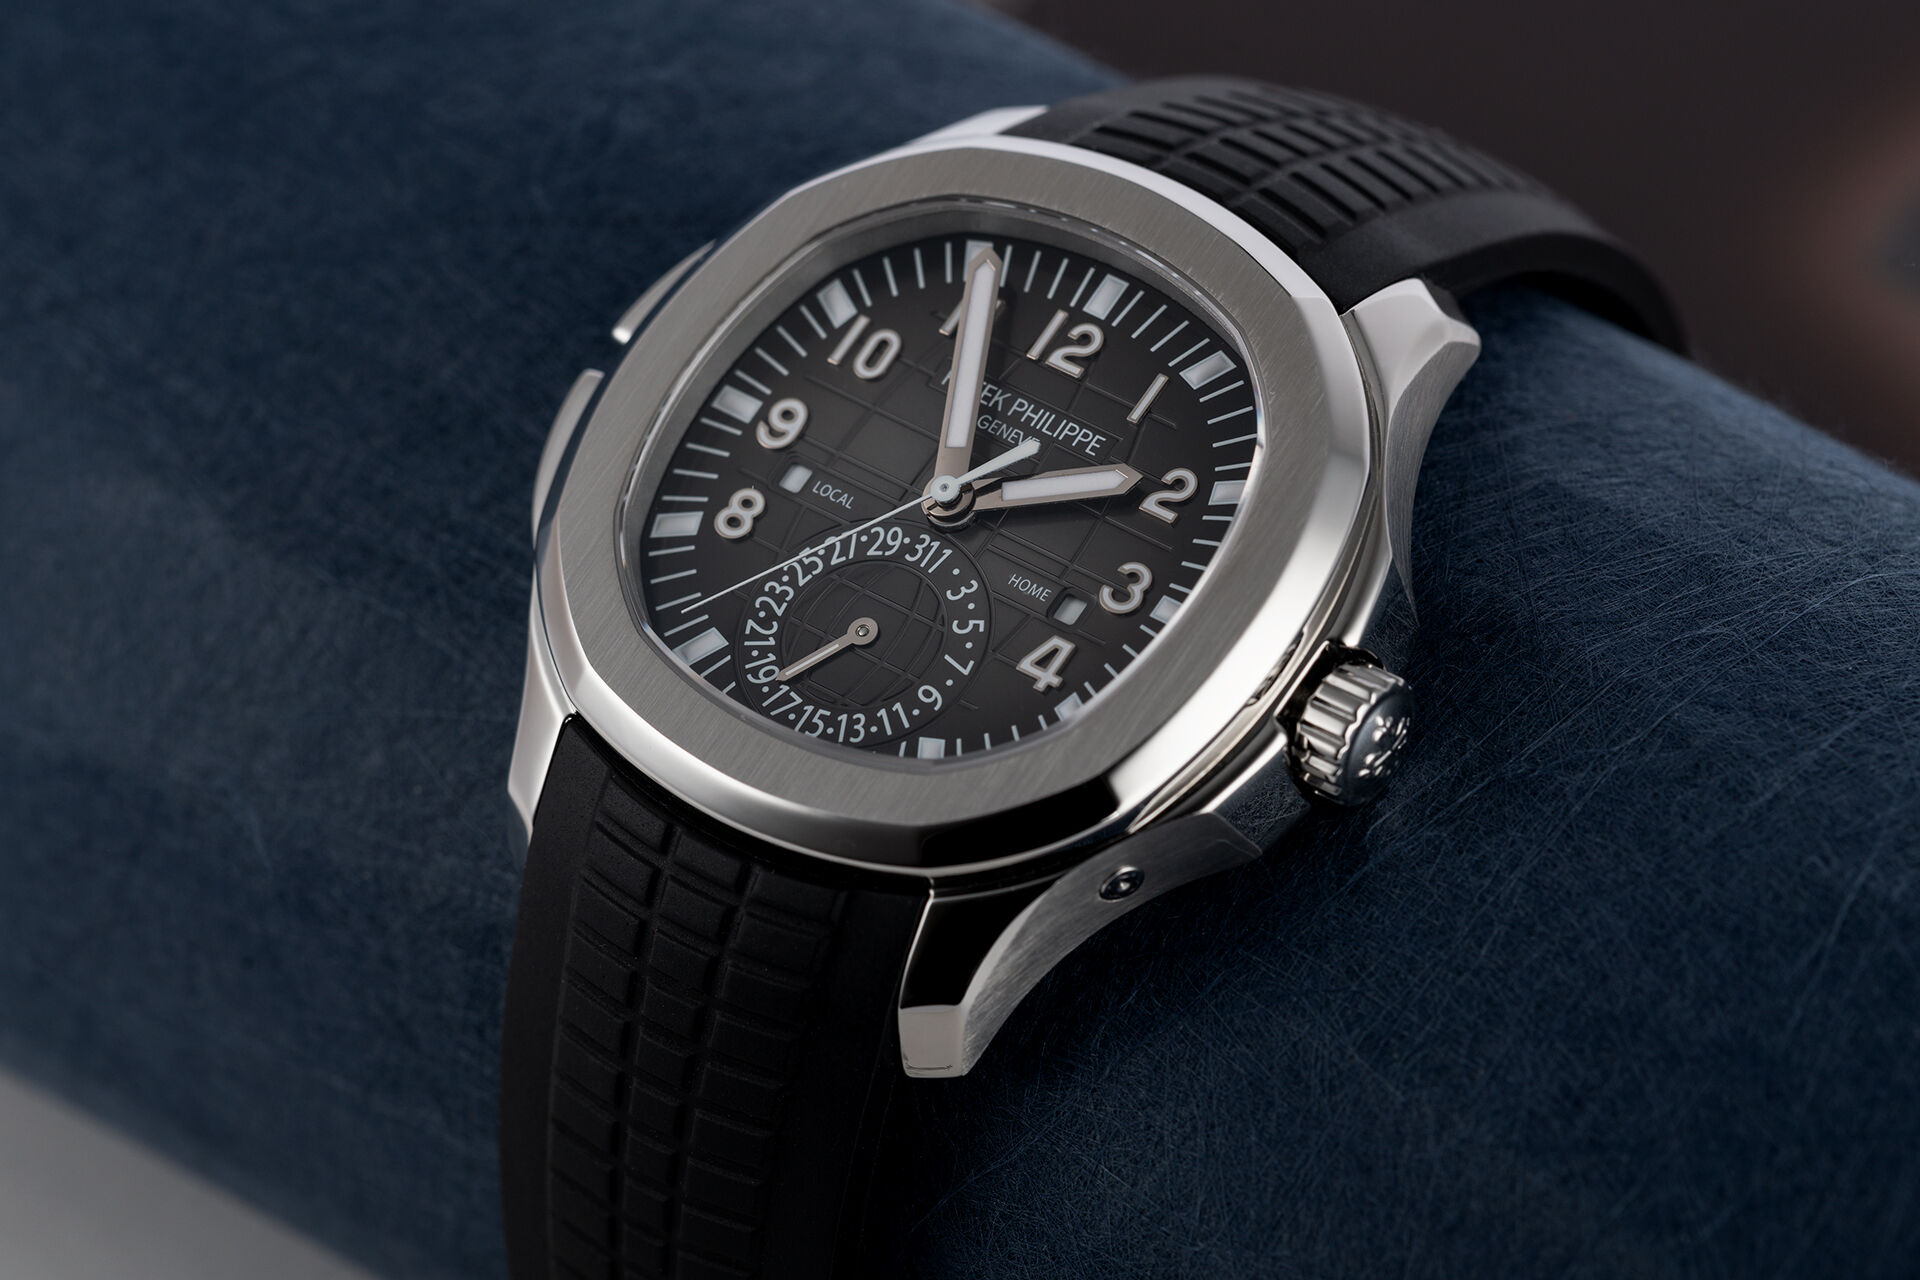 ref 5164A-001 | Box & Papers | Patek Philippe Aquanaut Travel Time